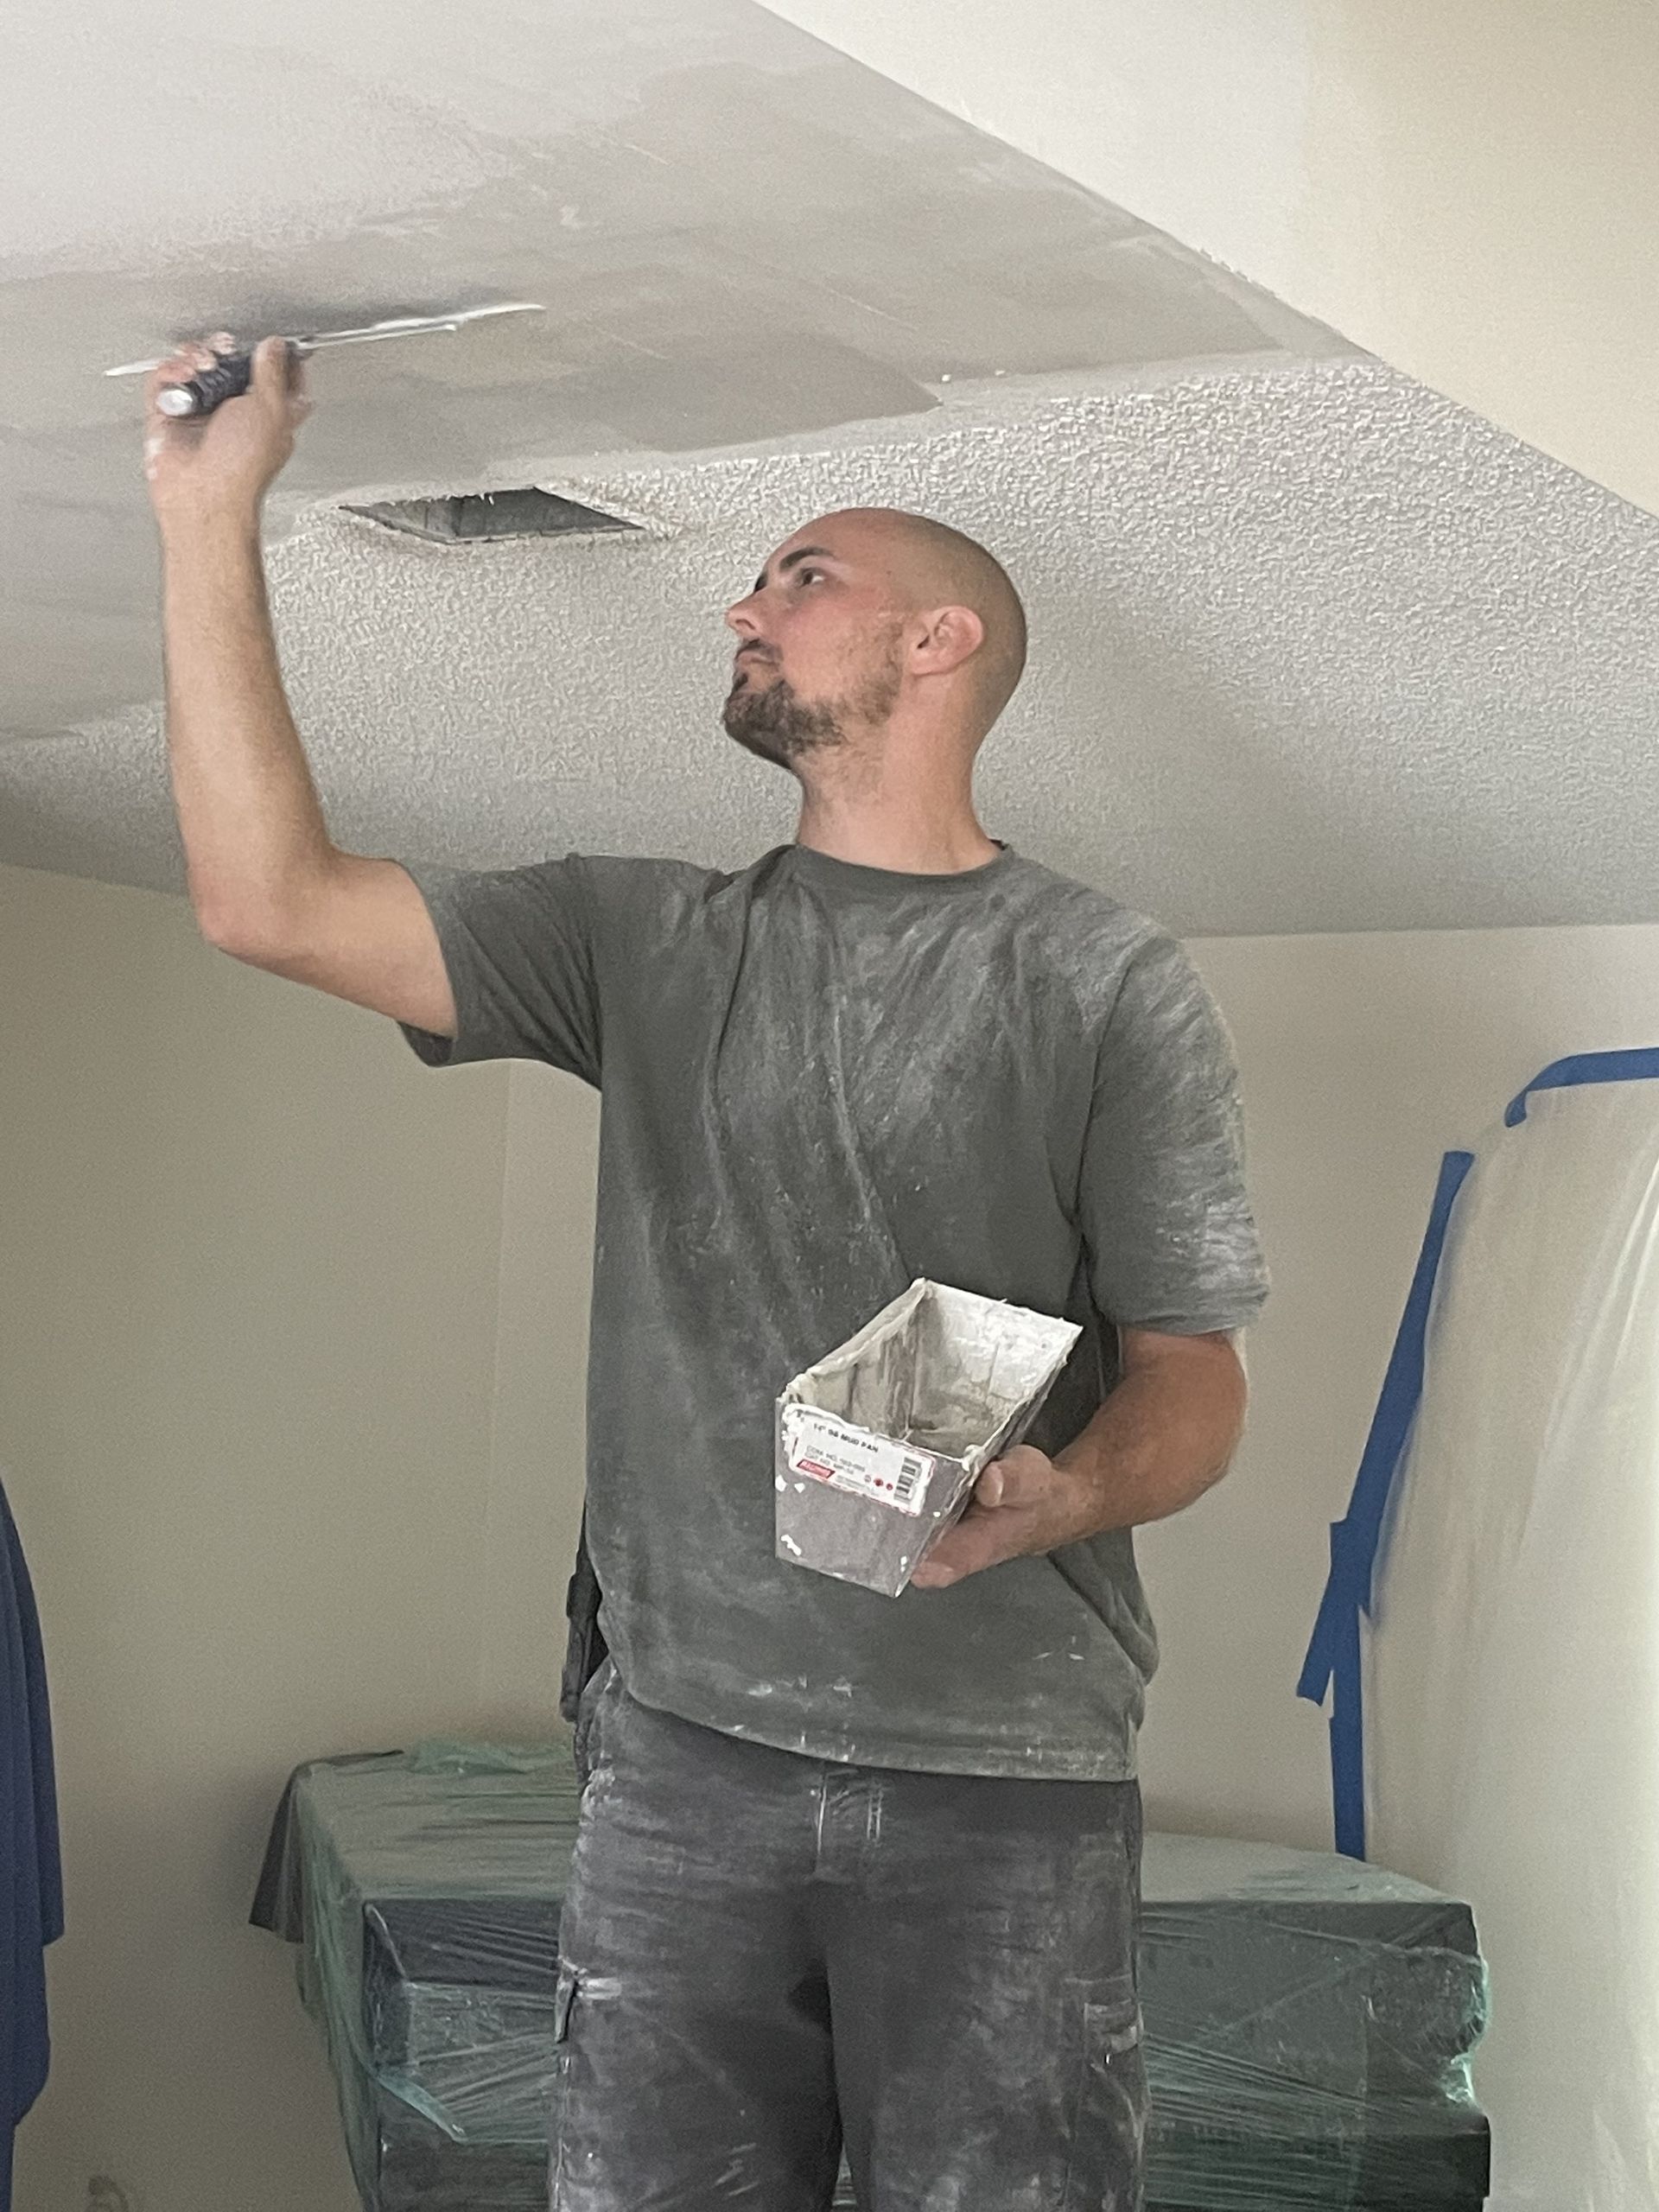 man painting a room ceiling